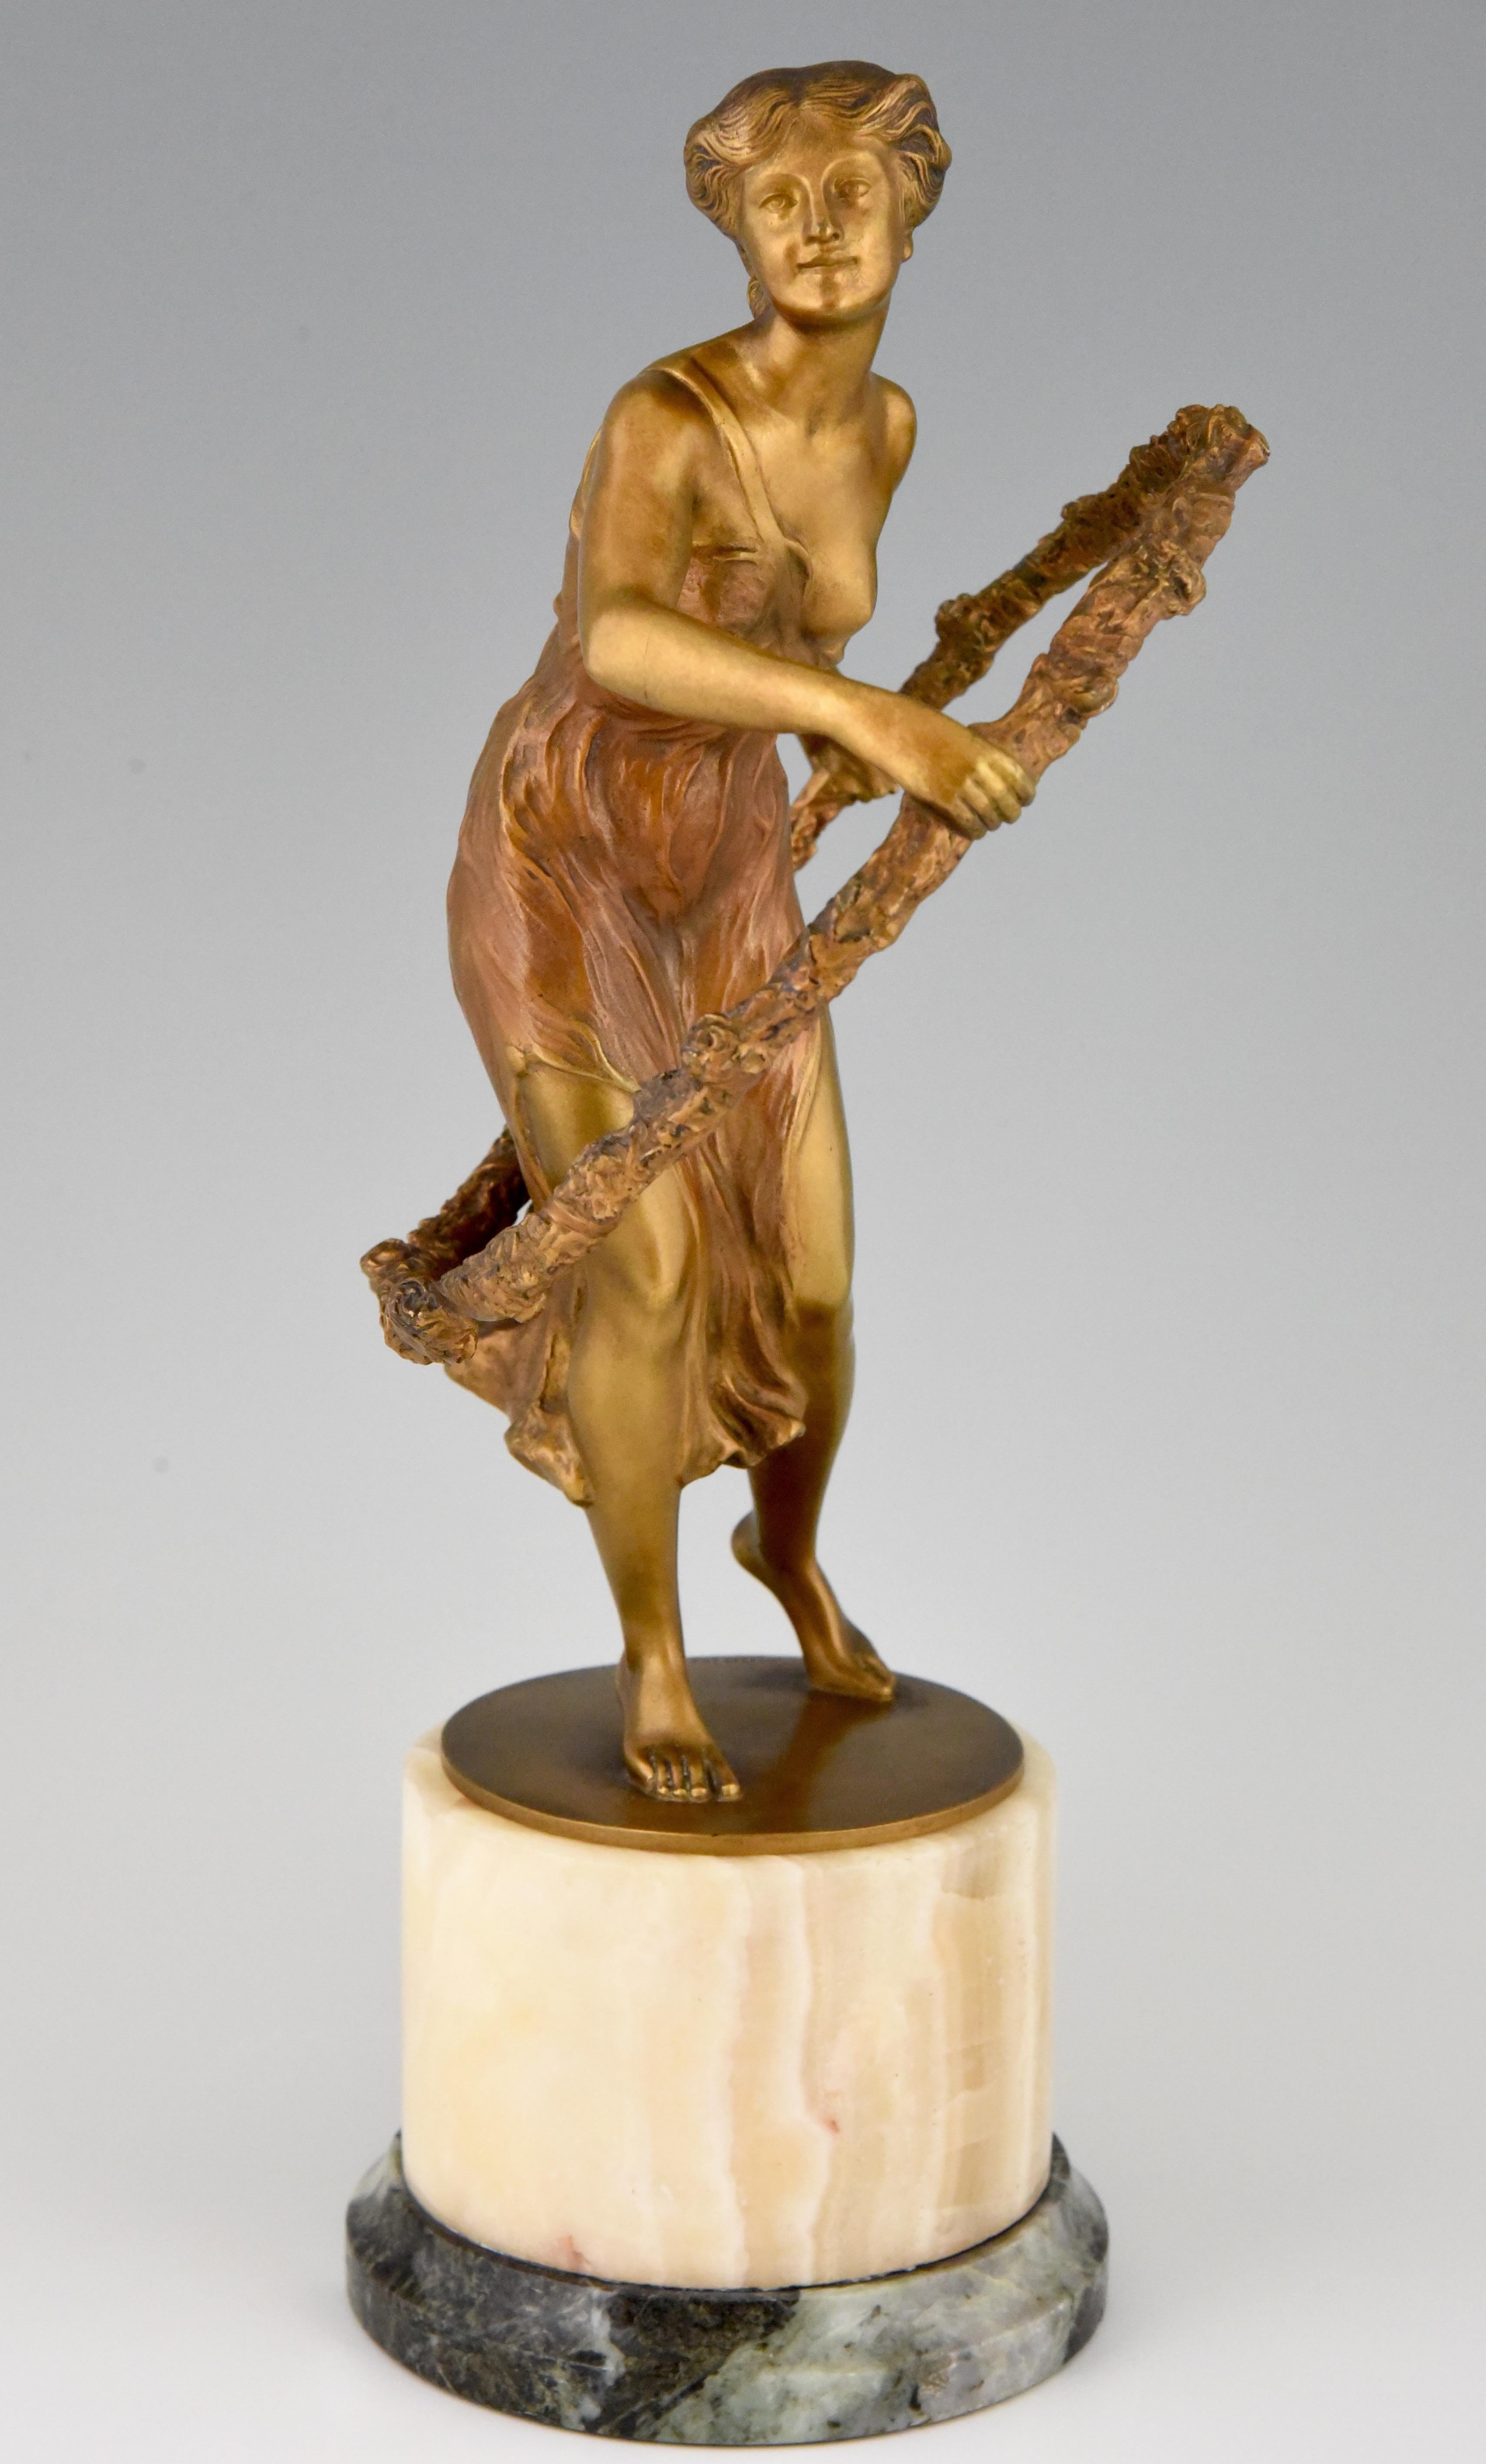 Art Deco sculpture of a hoop dancer by Georges Morin. The girl is wearing a flowing dress and the hoop is decorated with flowers. The fine quality gilded and patinated bronze stands on a circular marble base. Cast in France, circa 1920.